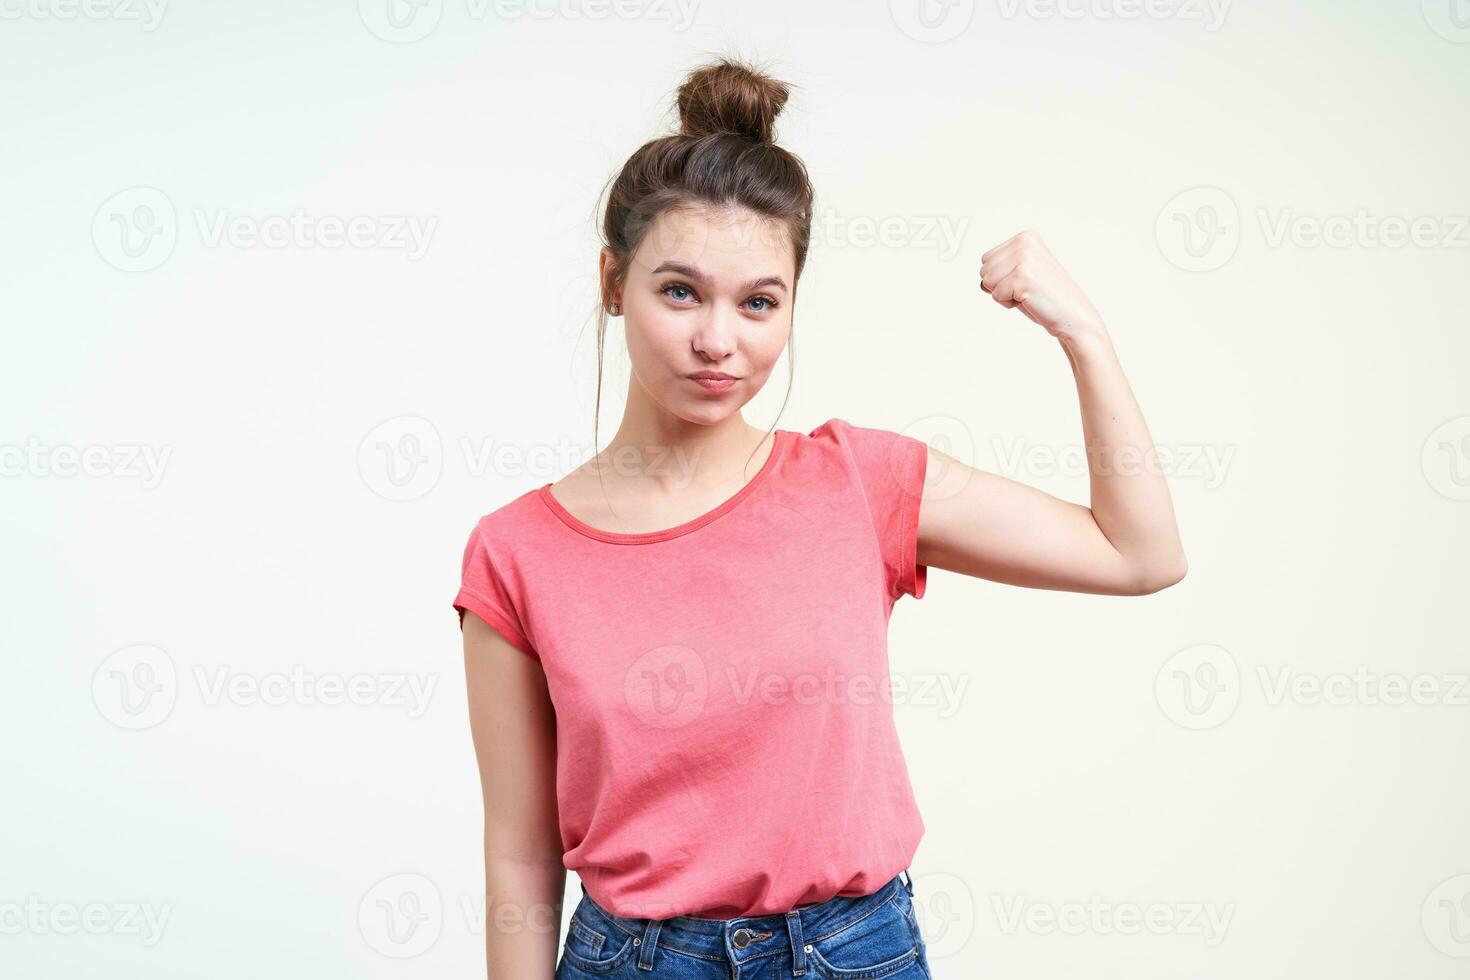 Studio photo of young charming brown haired woman with bun hairstyle looking attentively at camera while showing her power with raised hand, isolated over white background